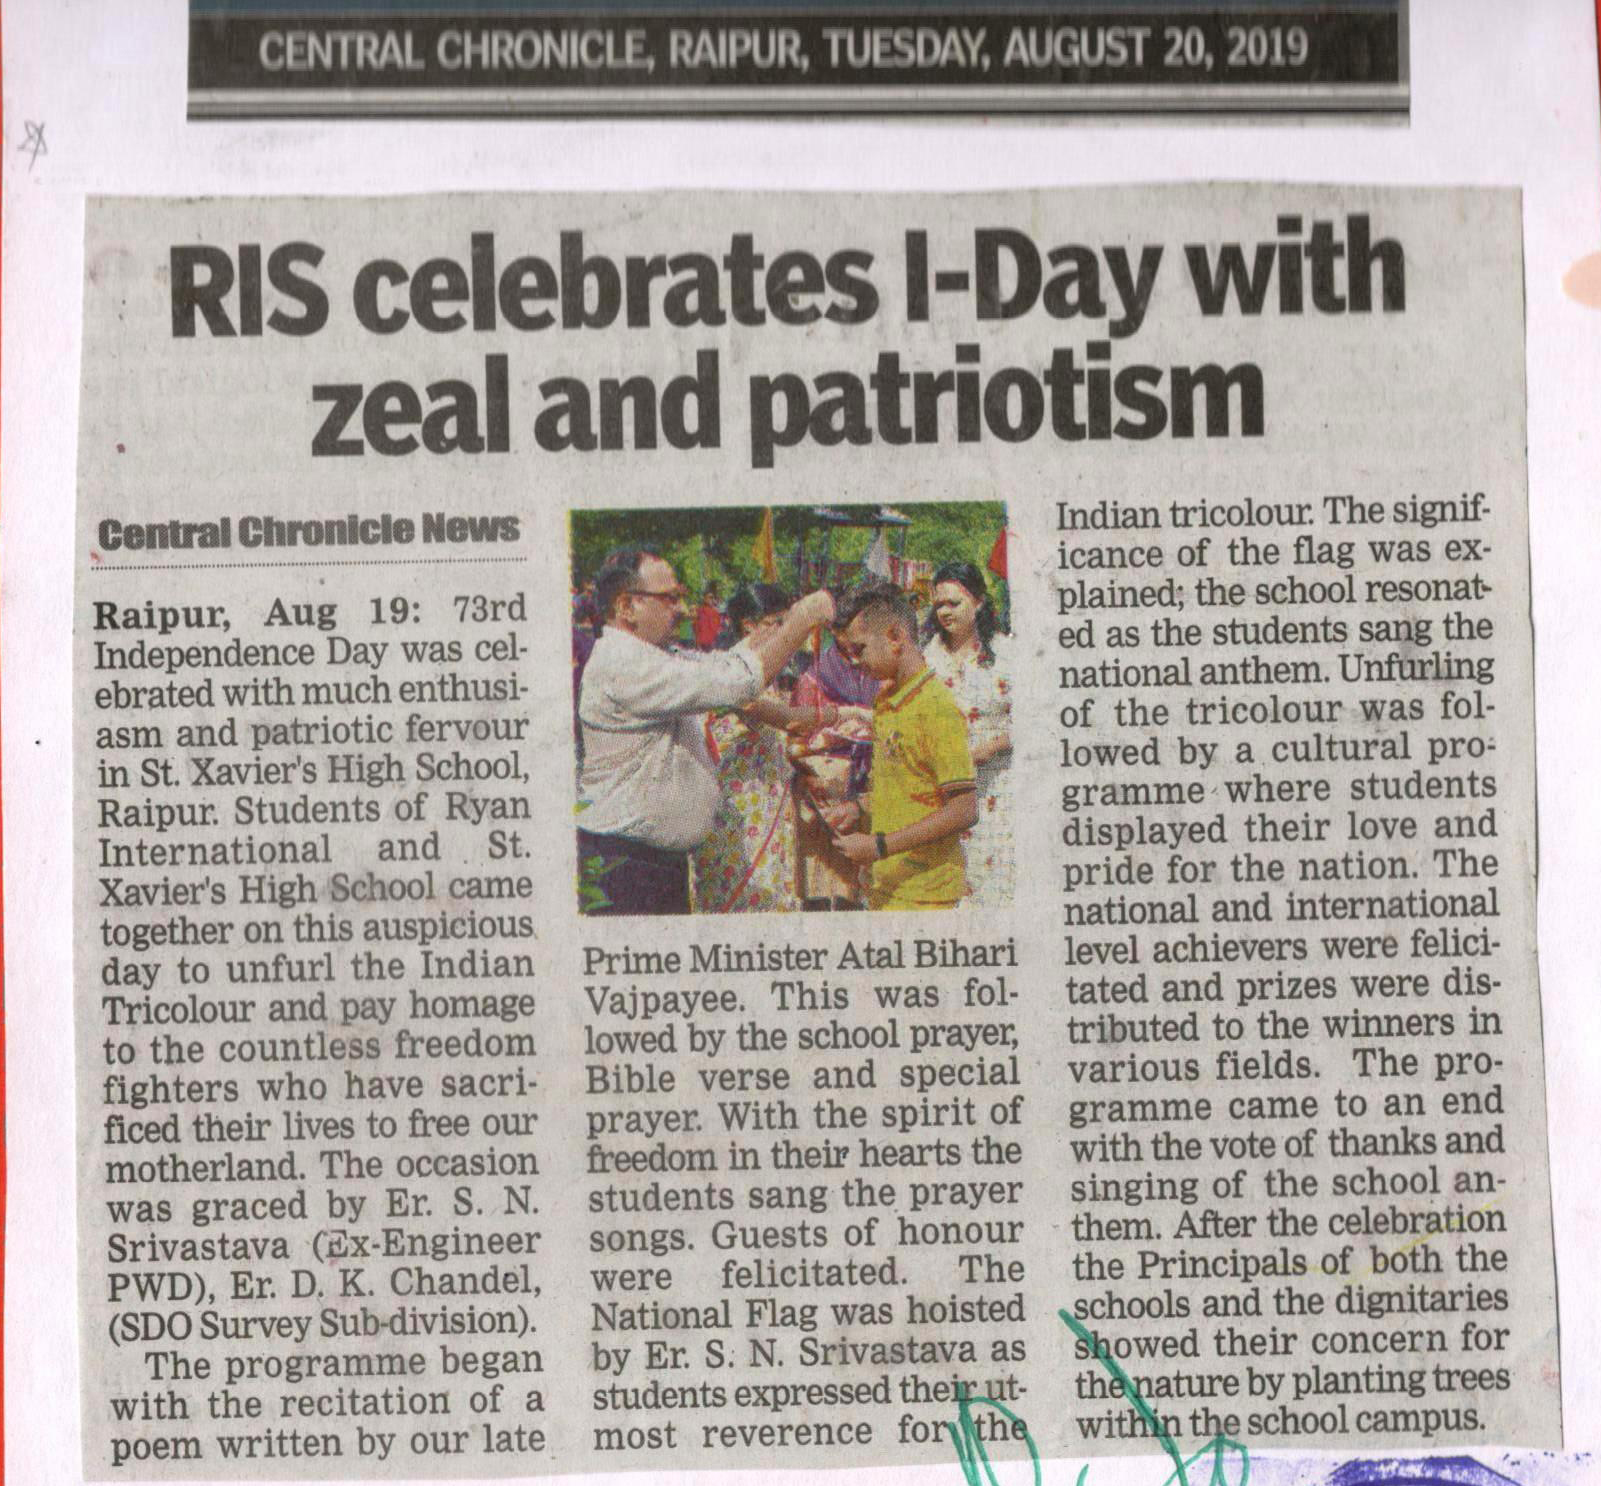 RIS Celebrates I-Day with zeal and patriotism